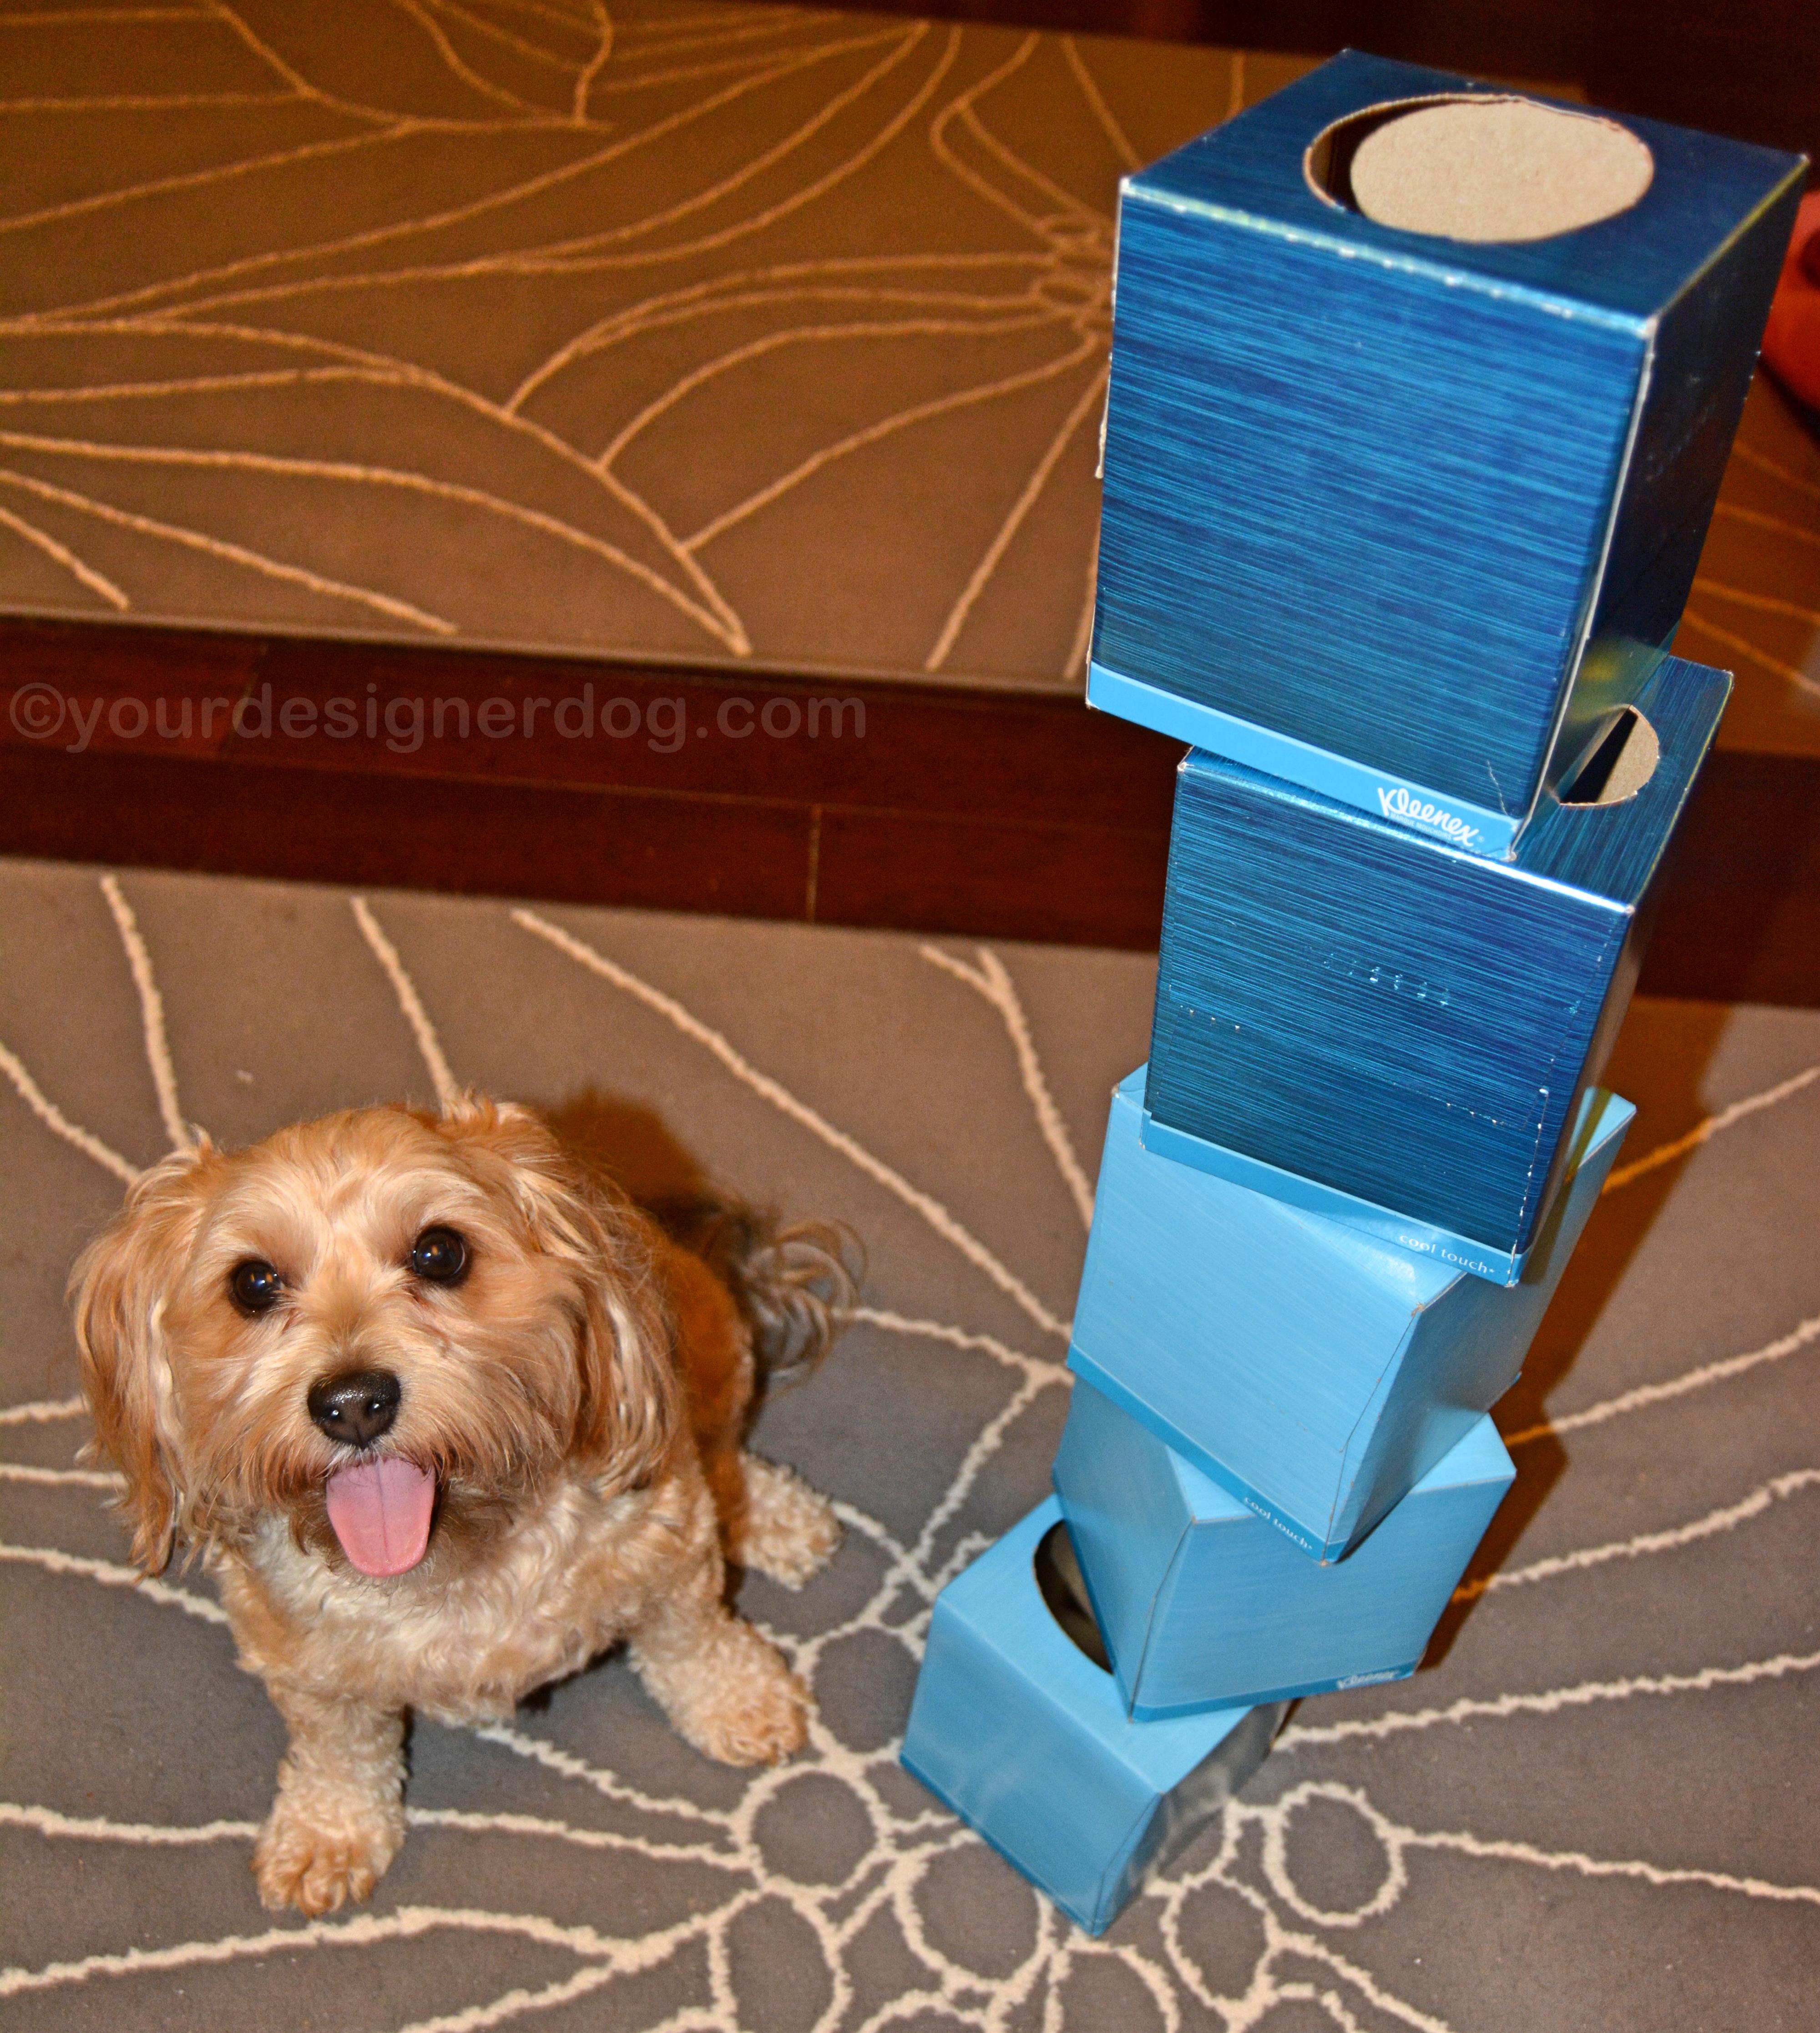 dogs, designer dogs. yorkipoo, yorkie poo, tissue boxes, tower game